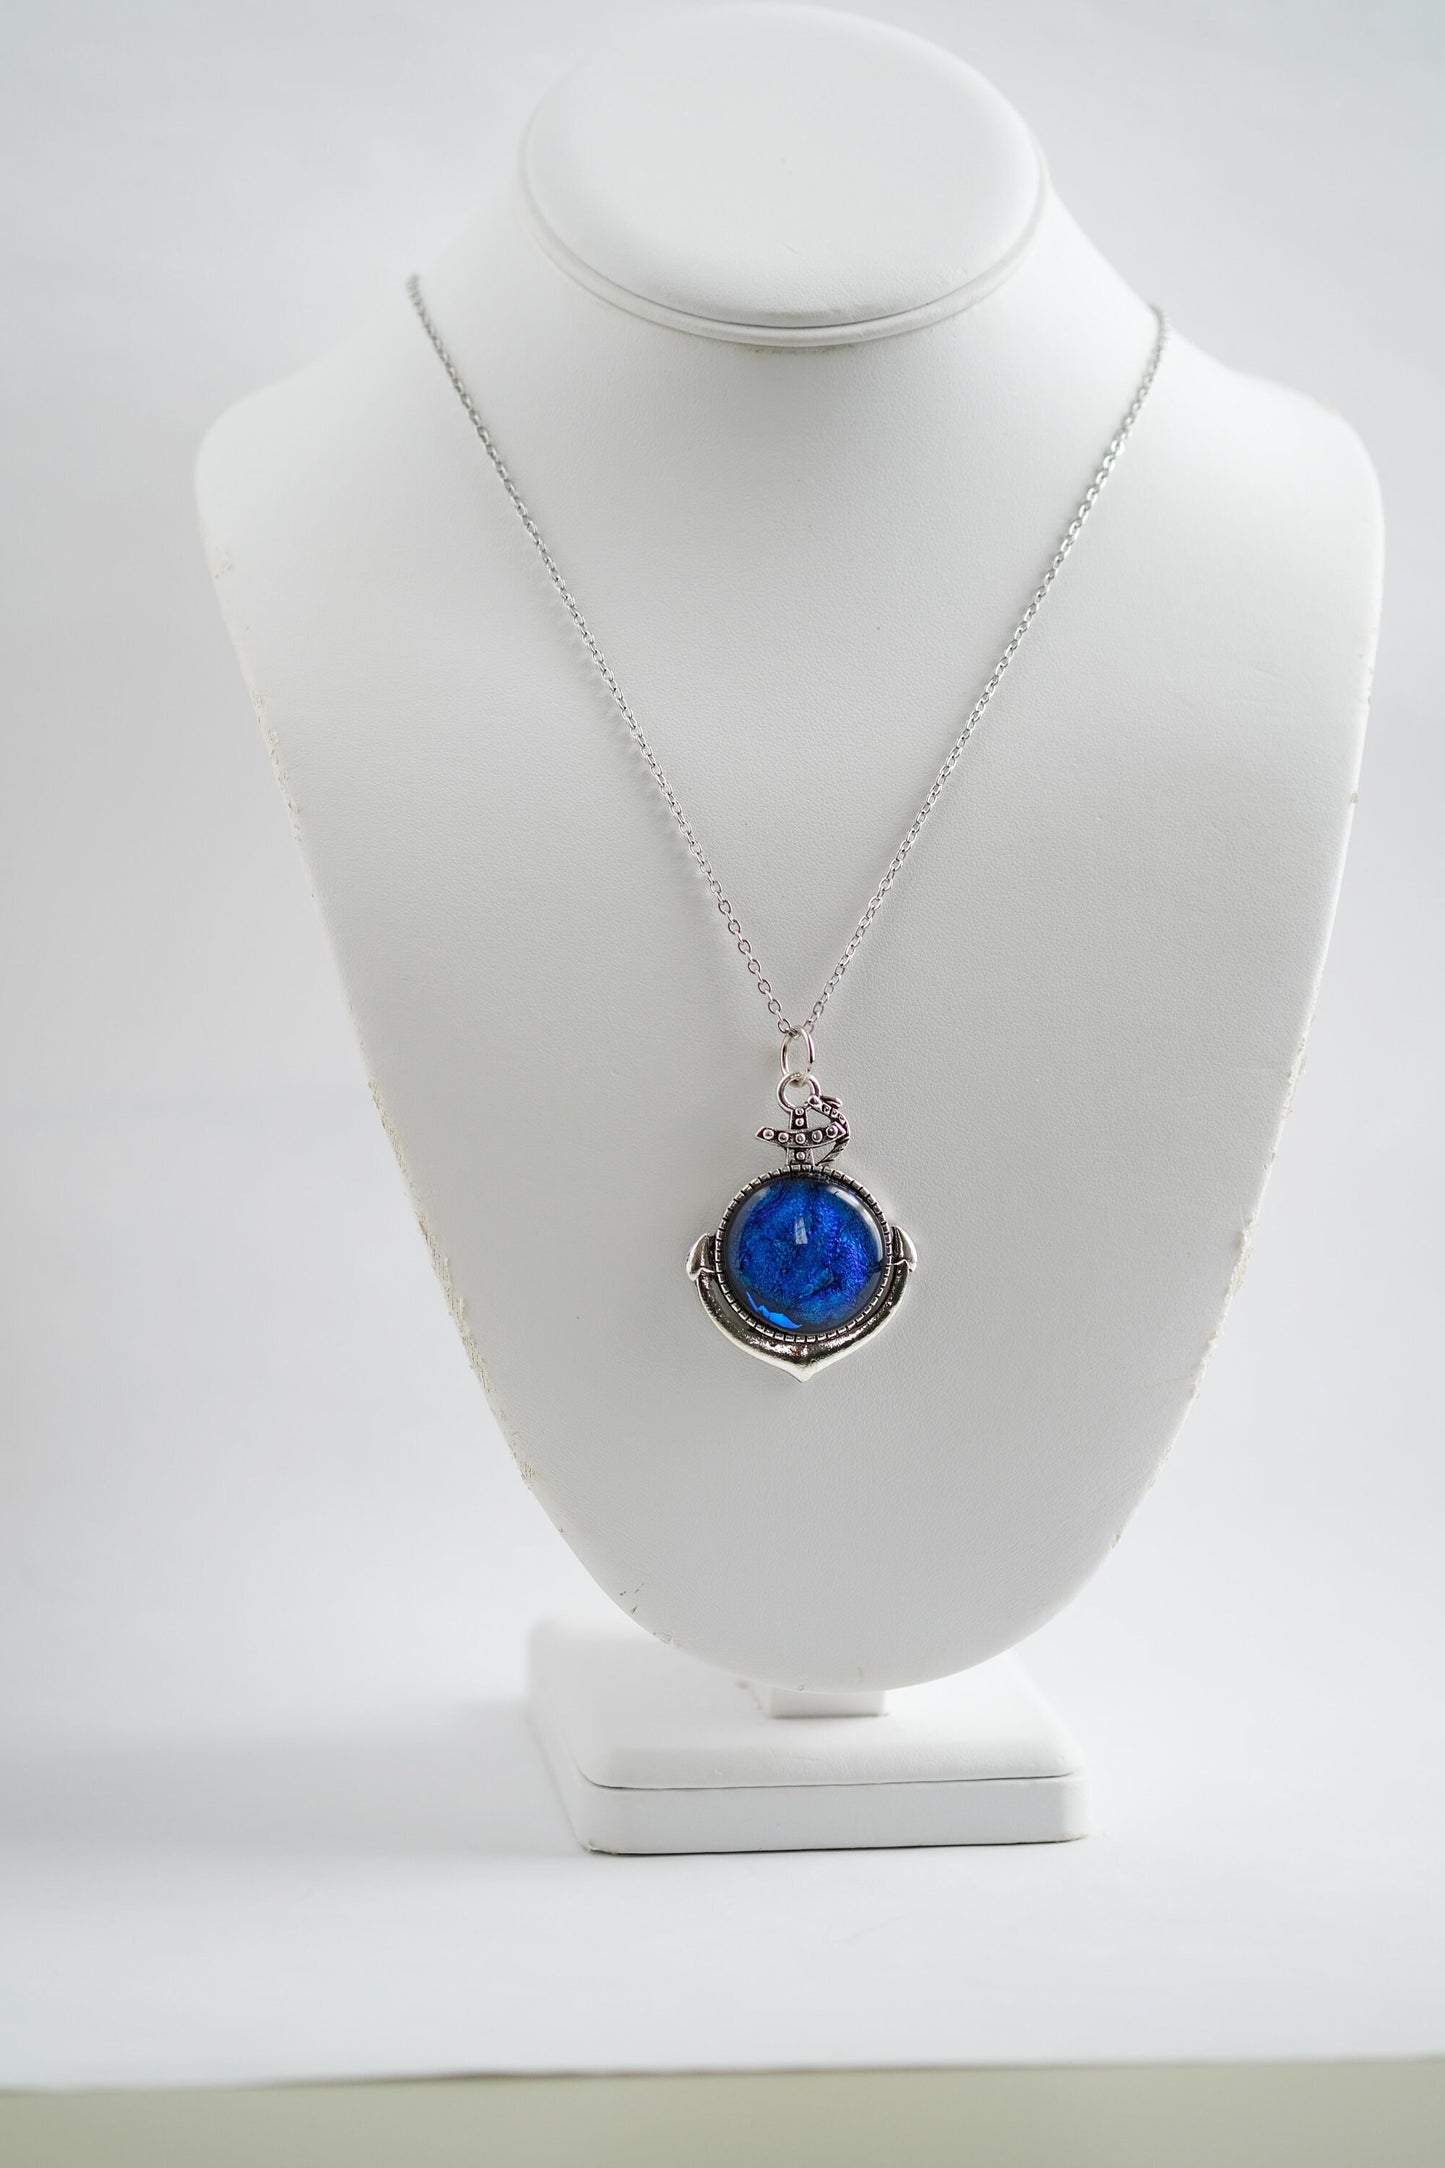 Silver Anchor pendant necklace, with blue sparkling dichroic fused glass center stone on a 20 inch steel chain